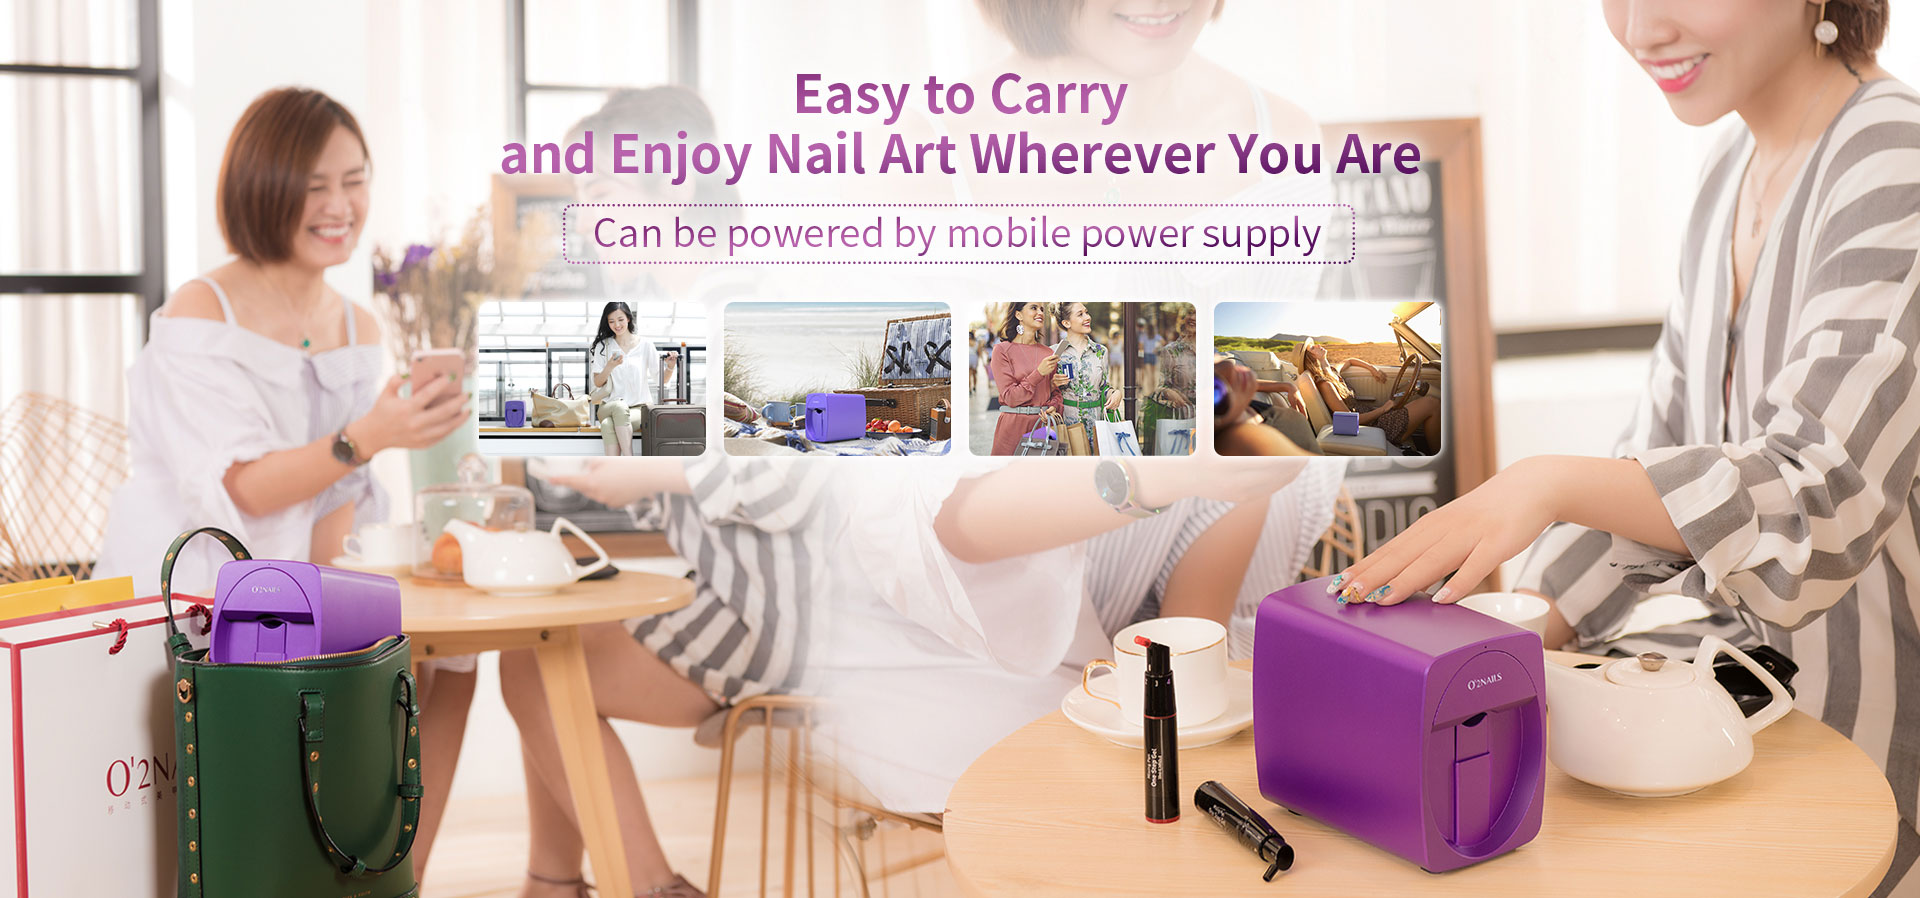 Easy to Carry and Enjoy Nail Art Wherever You Are